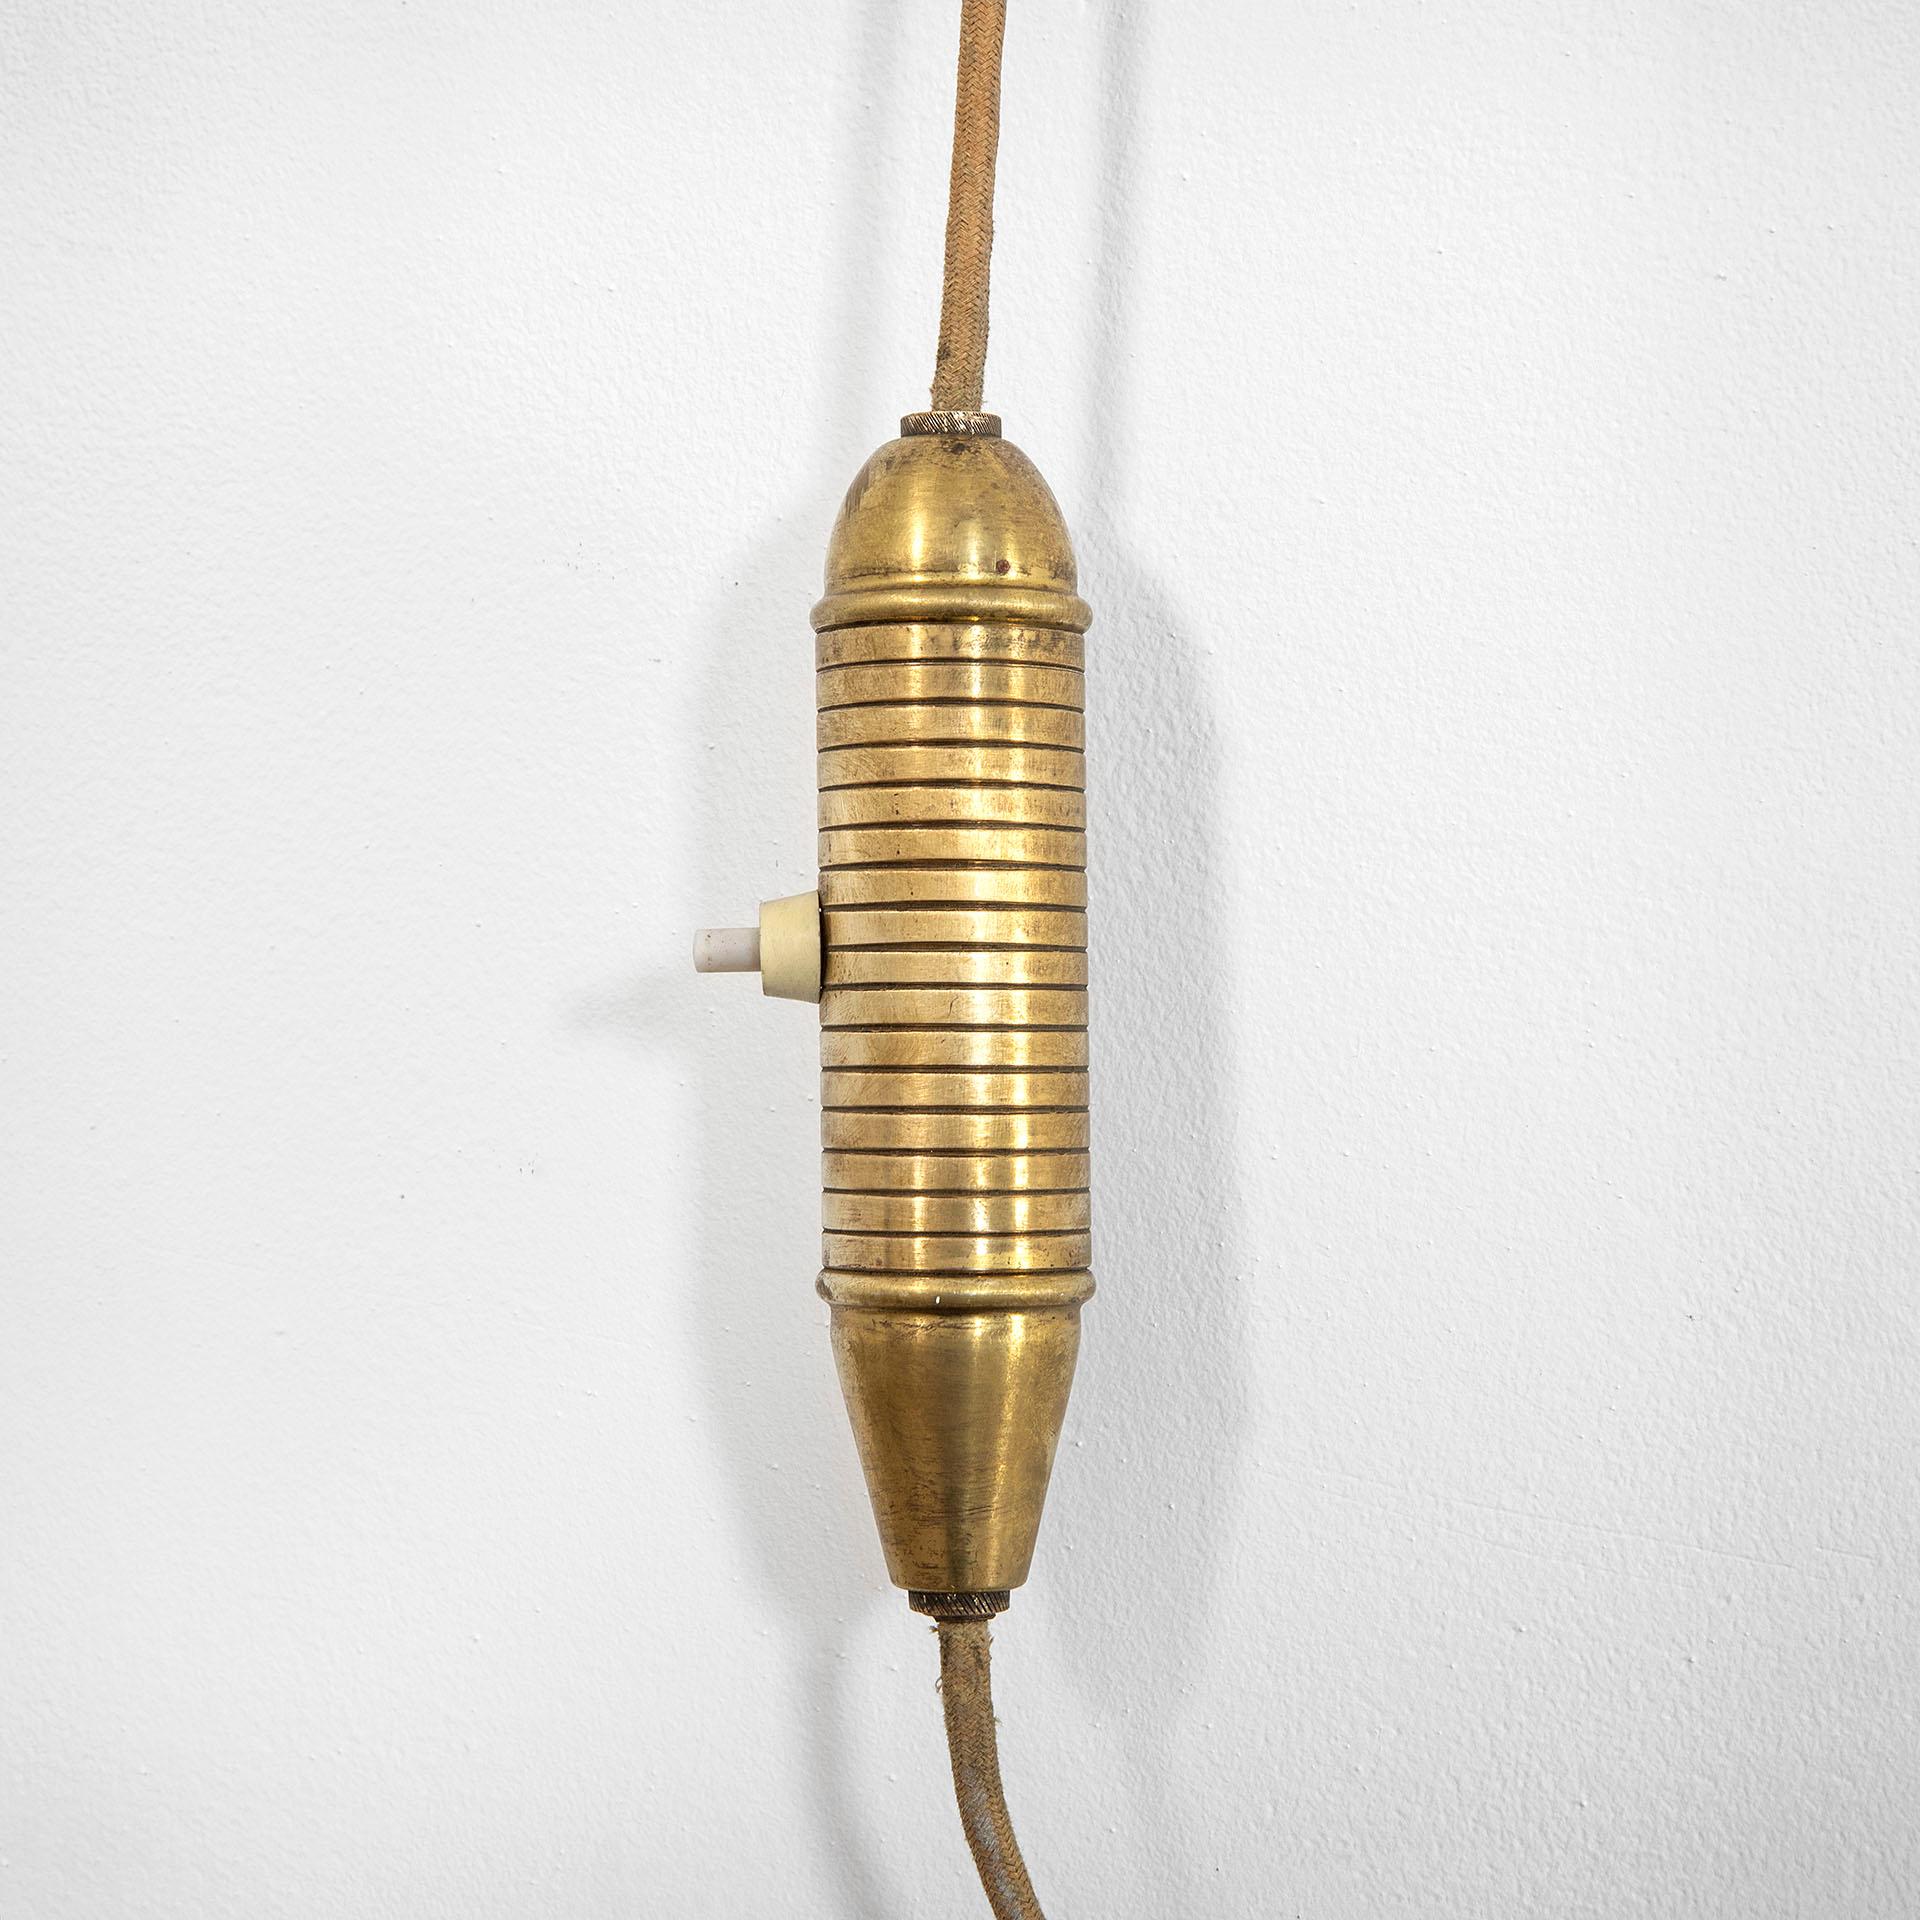 20th Century Stilnovo Wall Lamp Extendable Arm in Brass and Lacquered Metal, 50s For Sale 1